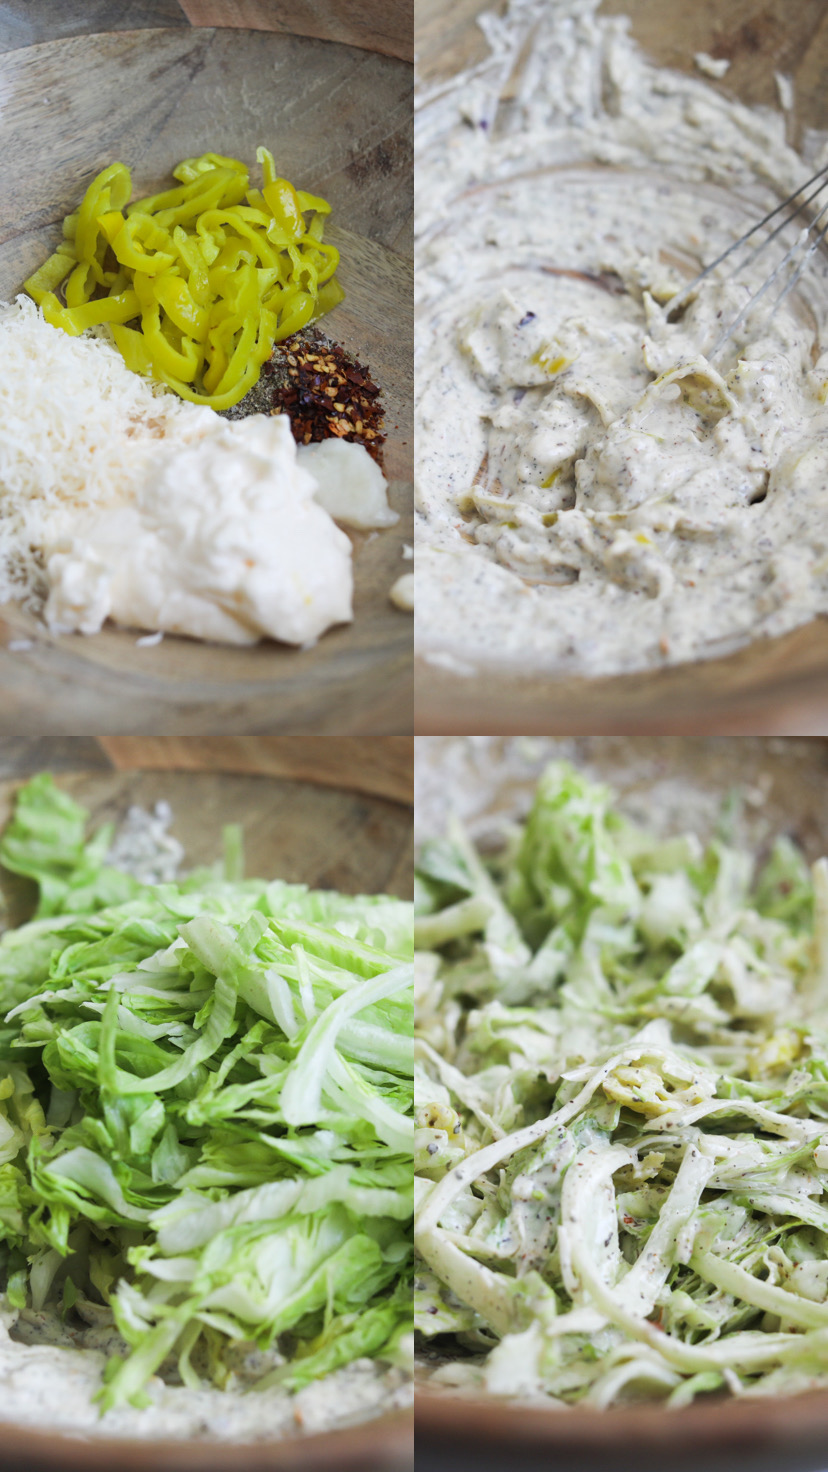 Step-by-step collage of images showing grinder salad recipe.